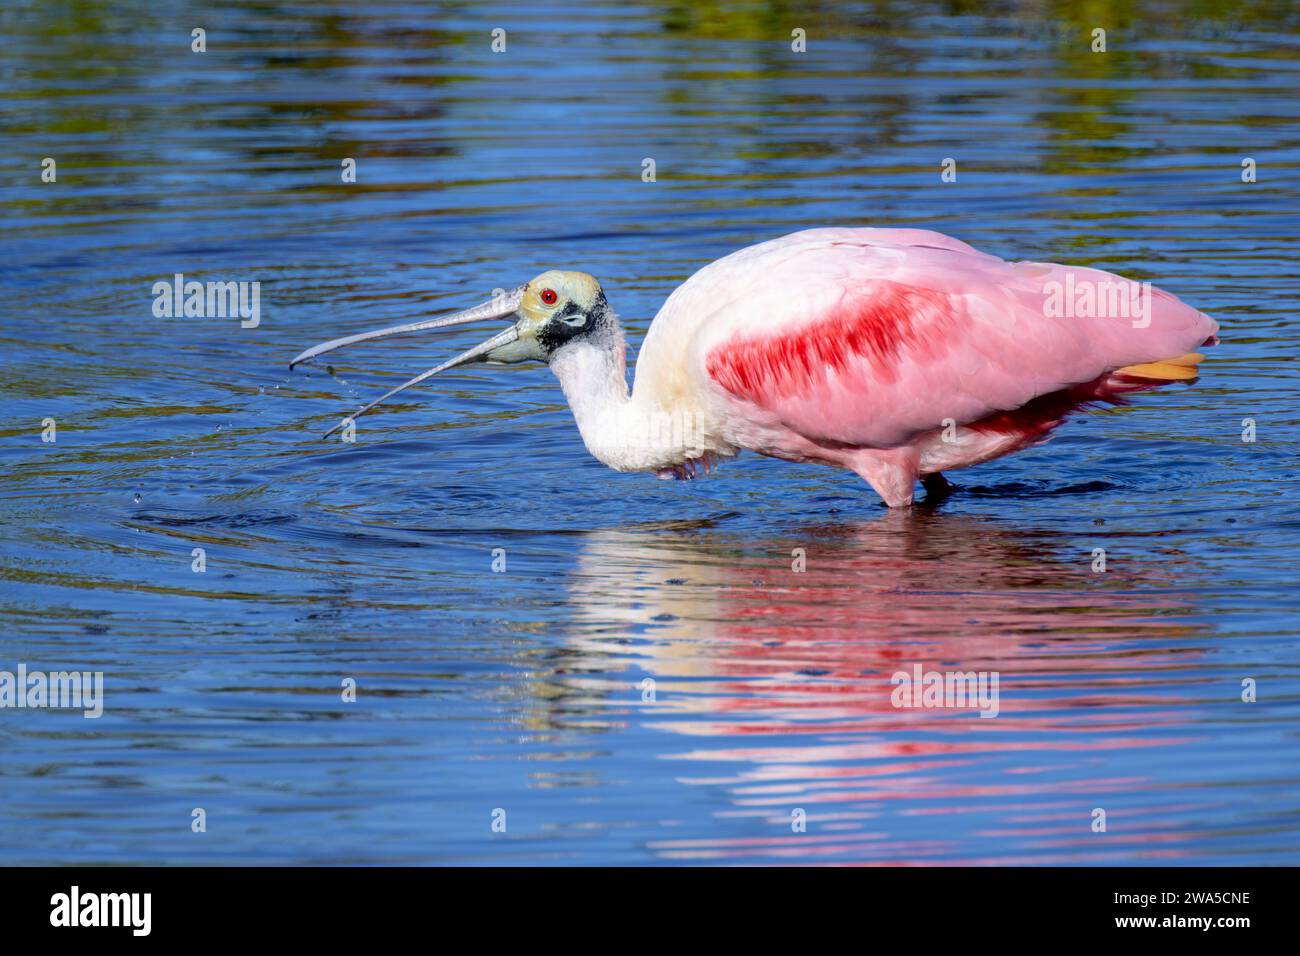 Roseate Spoonbill (Platalea ajaja)catching food in water with reflection, Merrit island, Florida, USA. Stock Photo